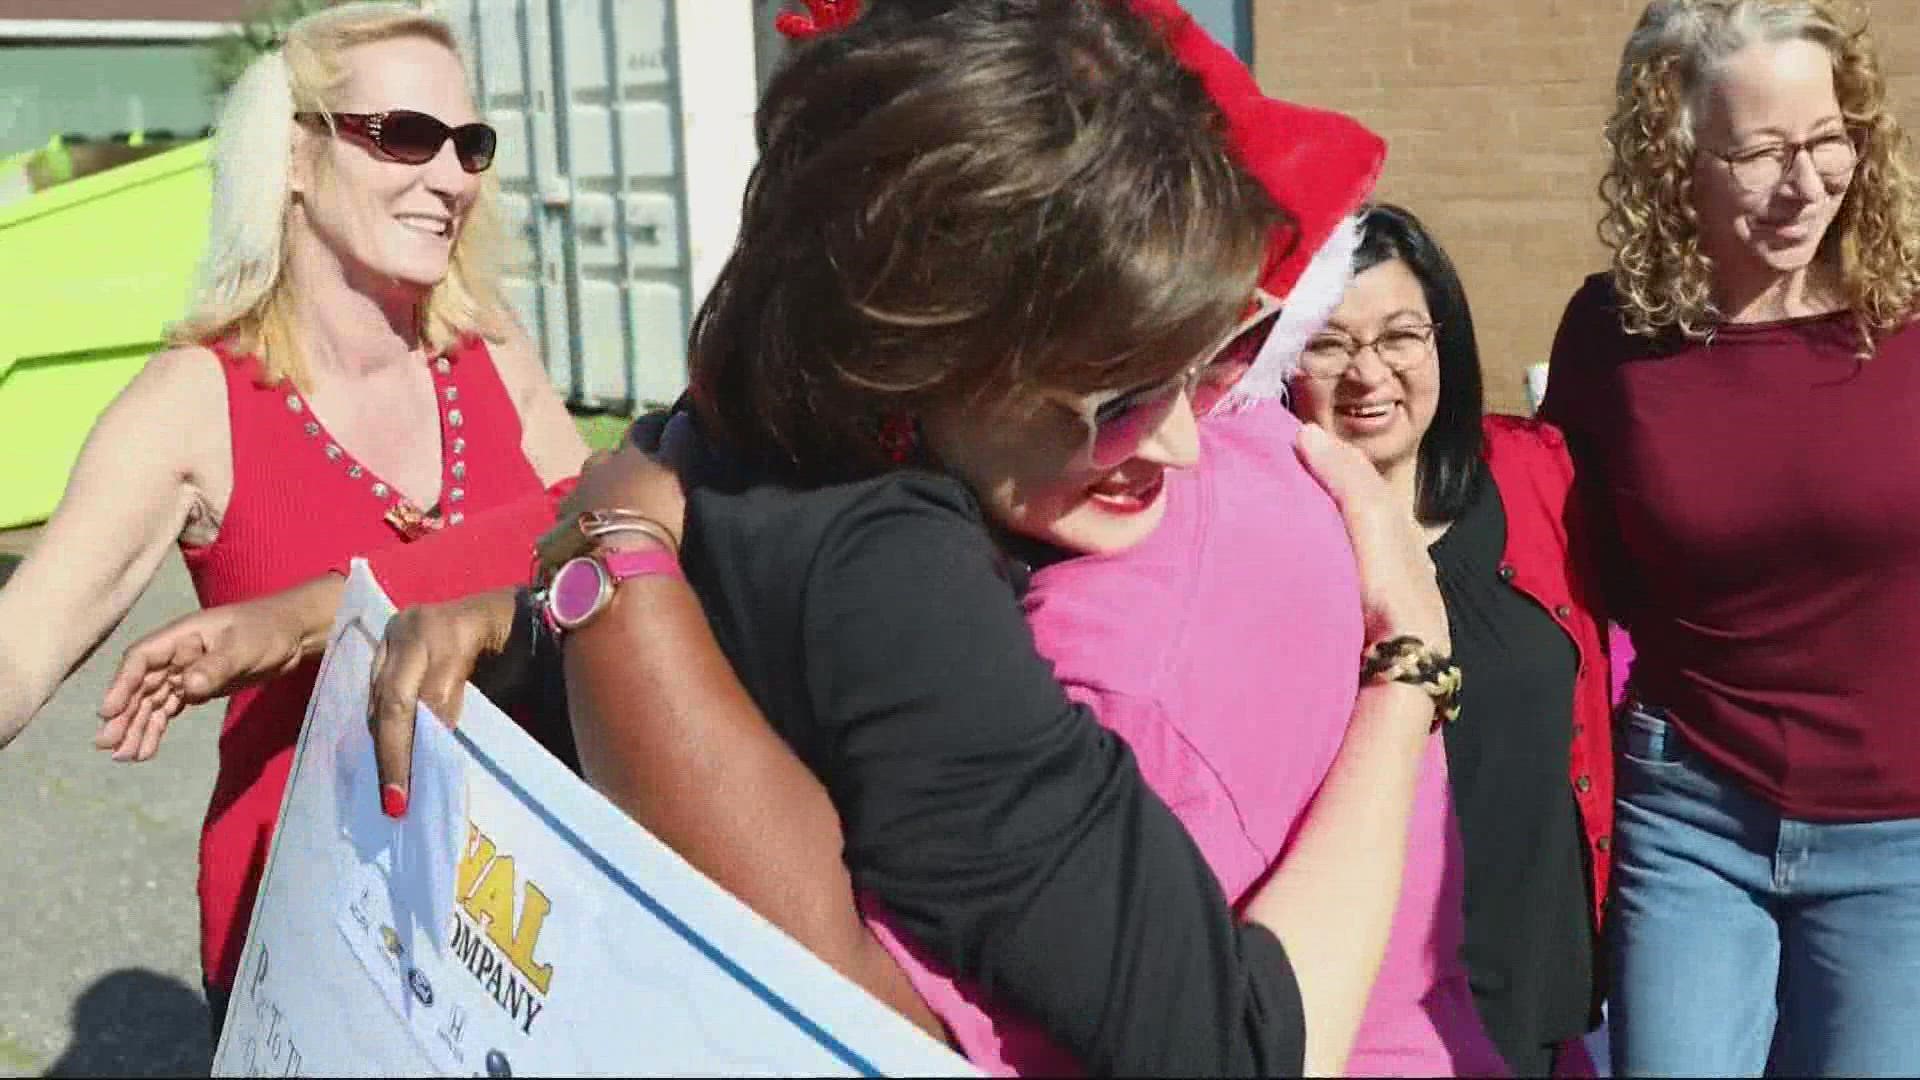 She beat breast cancer, and now her small non-profit is taking on a mighty mission.